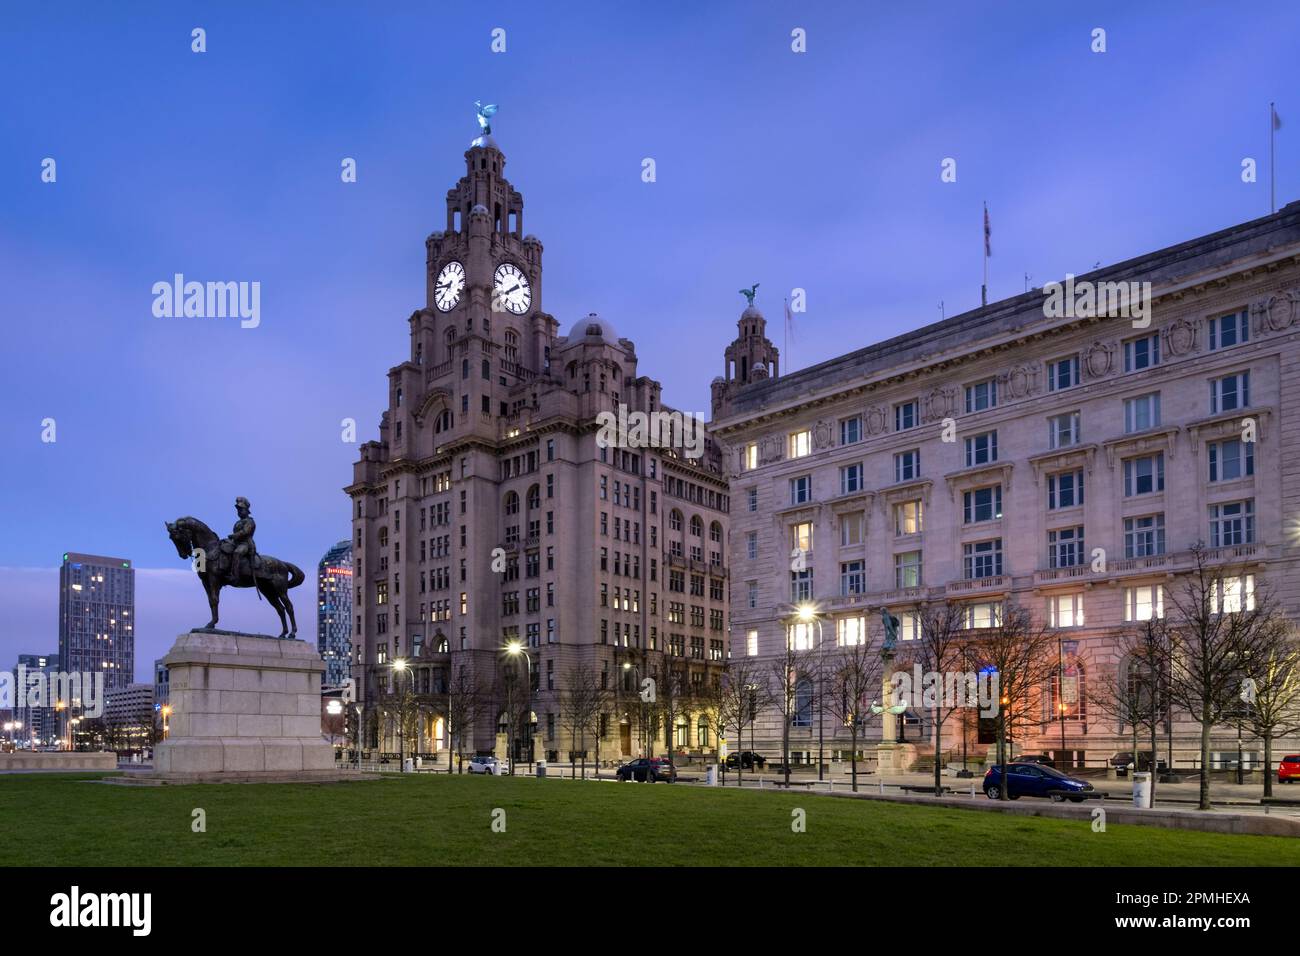 The Liver Building and Pier Head at night, Liverpool Waterfront, Liverpool, Merseyside, England, United Kingdom, Europe Stock Photo